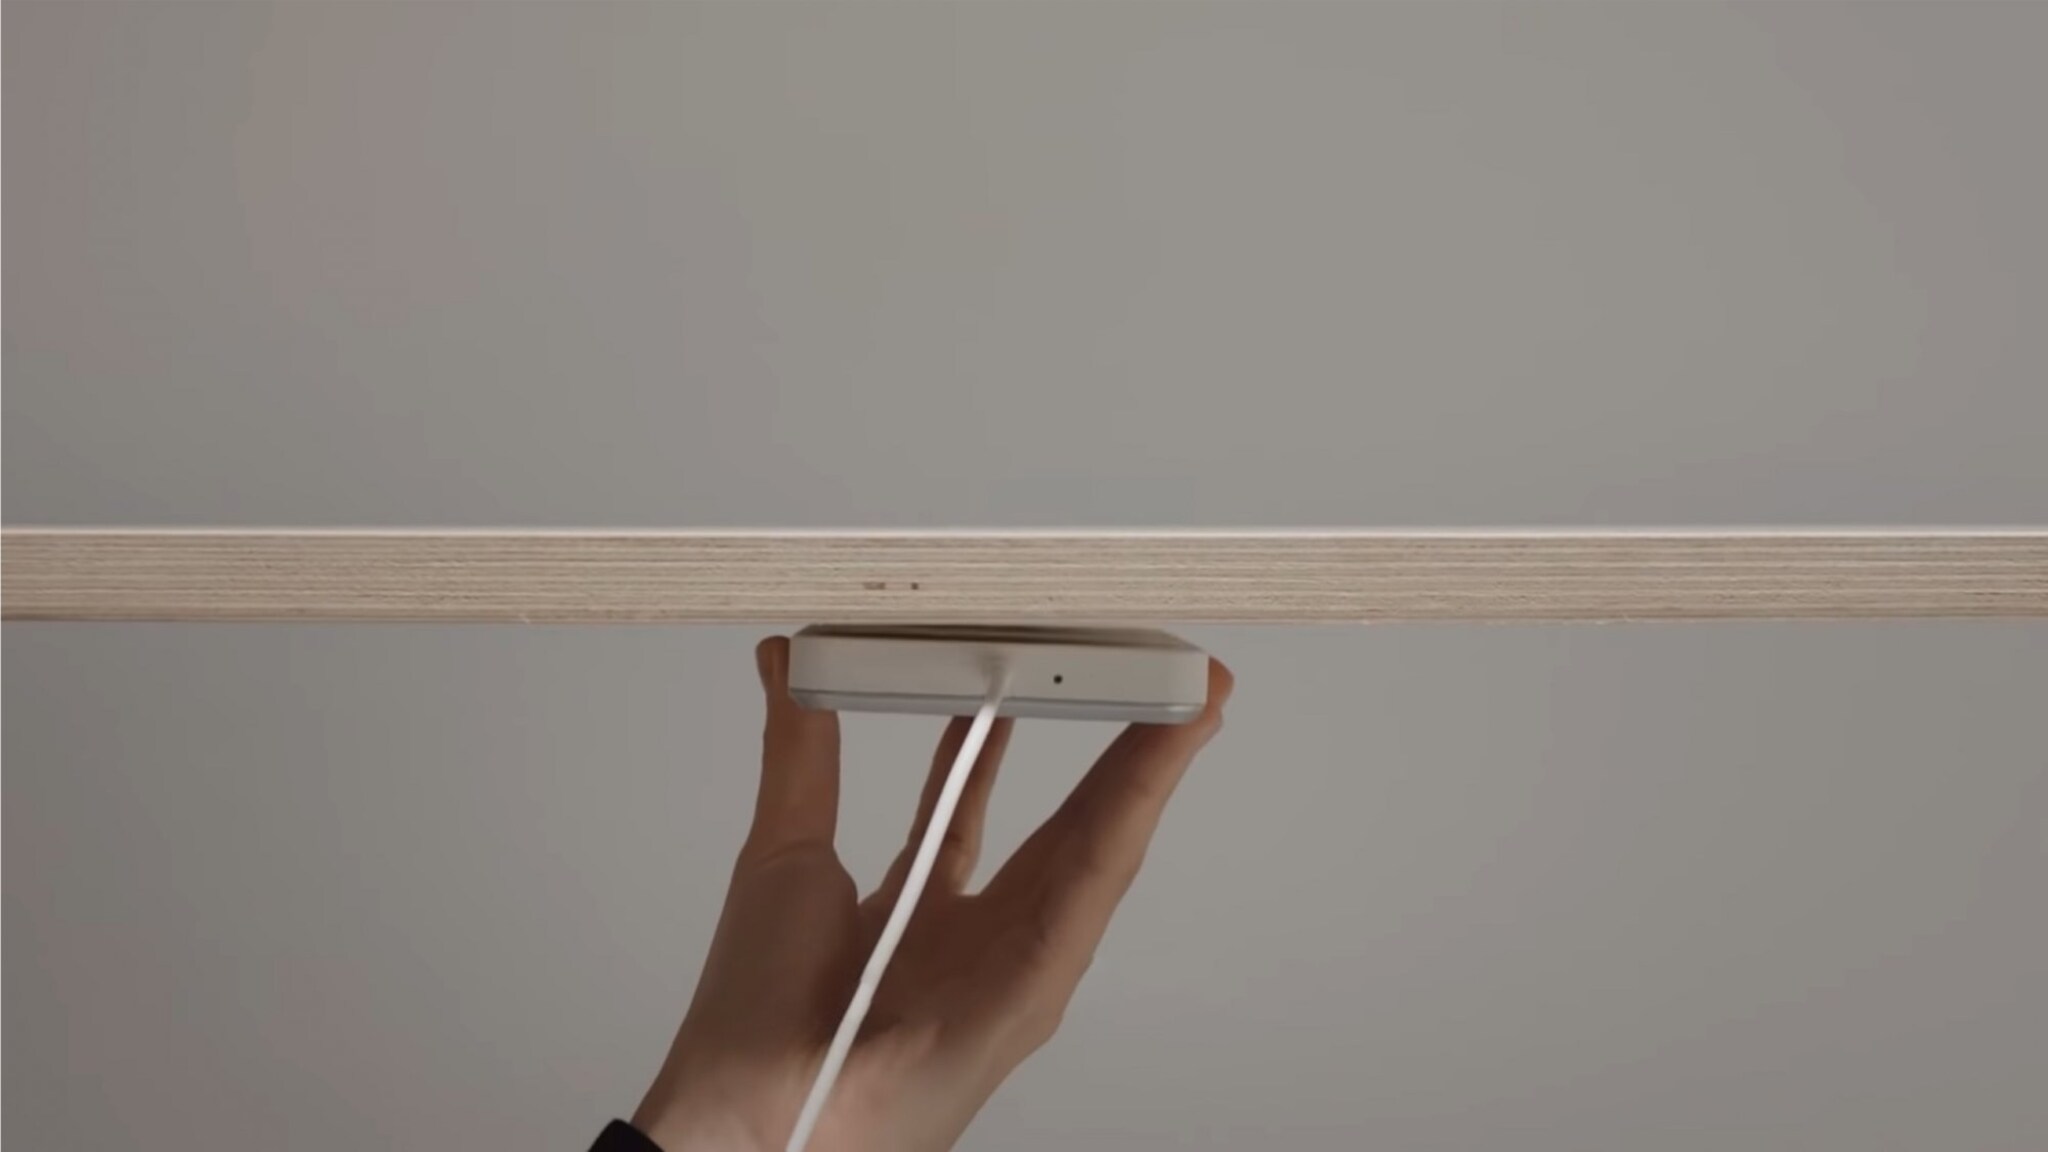 IKEA comes with a wireless charger that can be "invisible" under the table